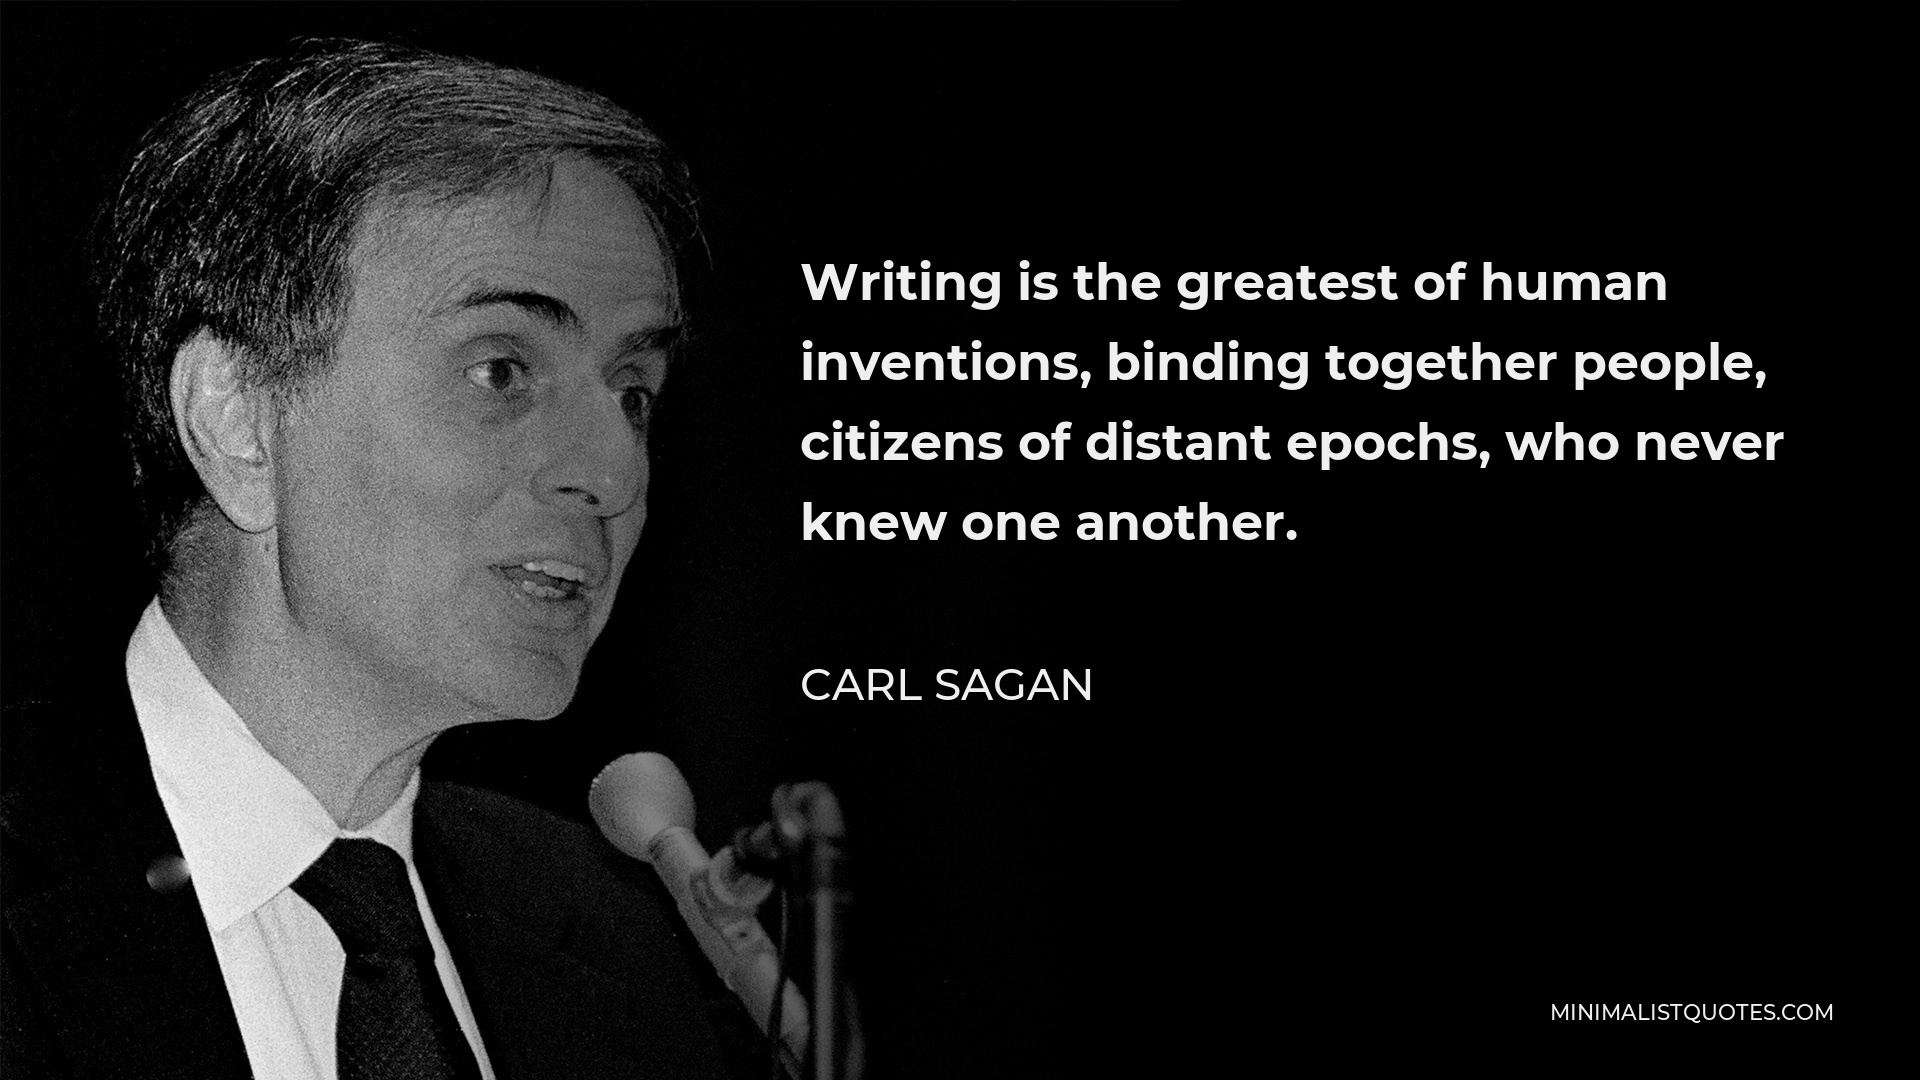 Carl Sagan Quote - Writing is the greatest of human inventions, binding together people, citizens of distant epochs, who never knew one another.